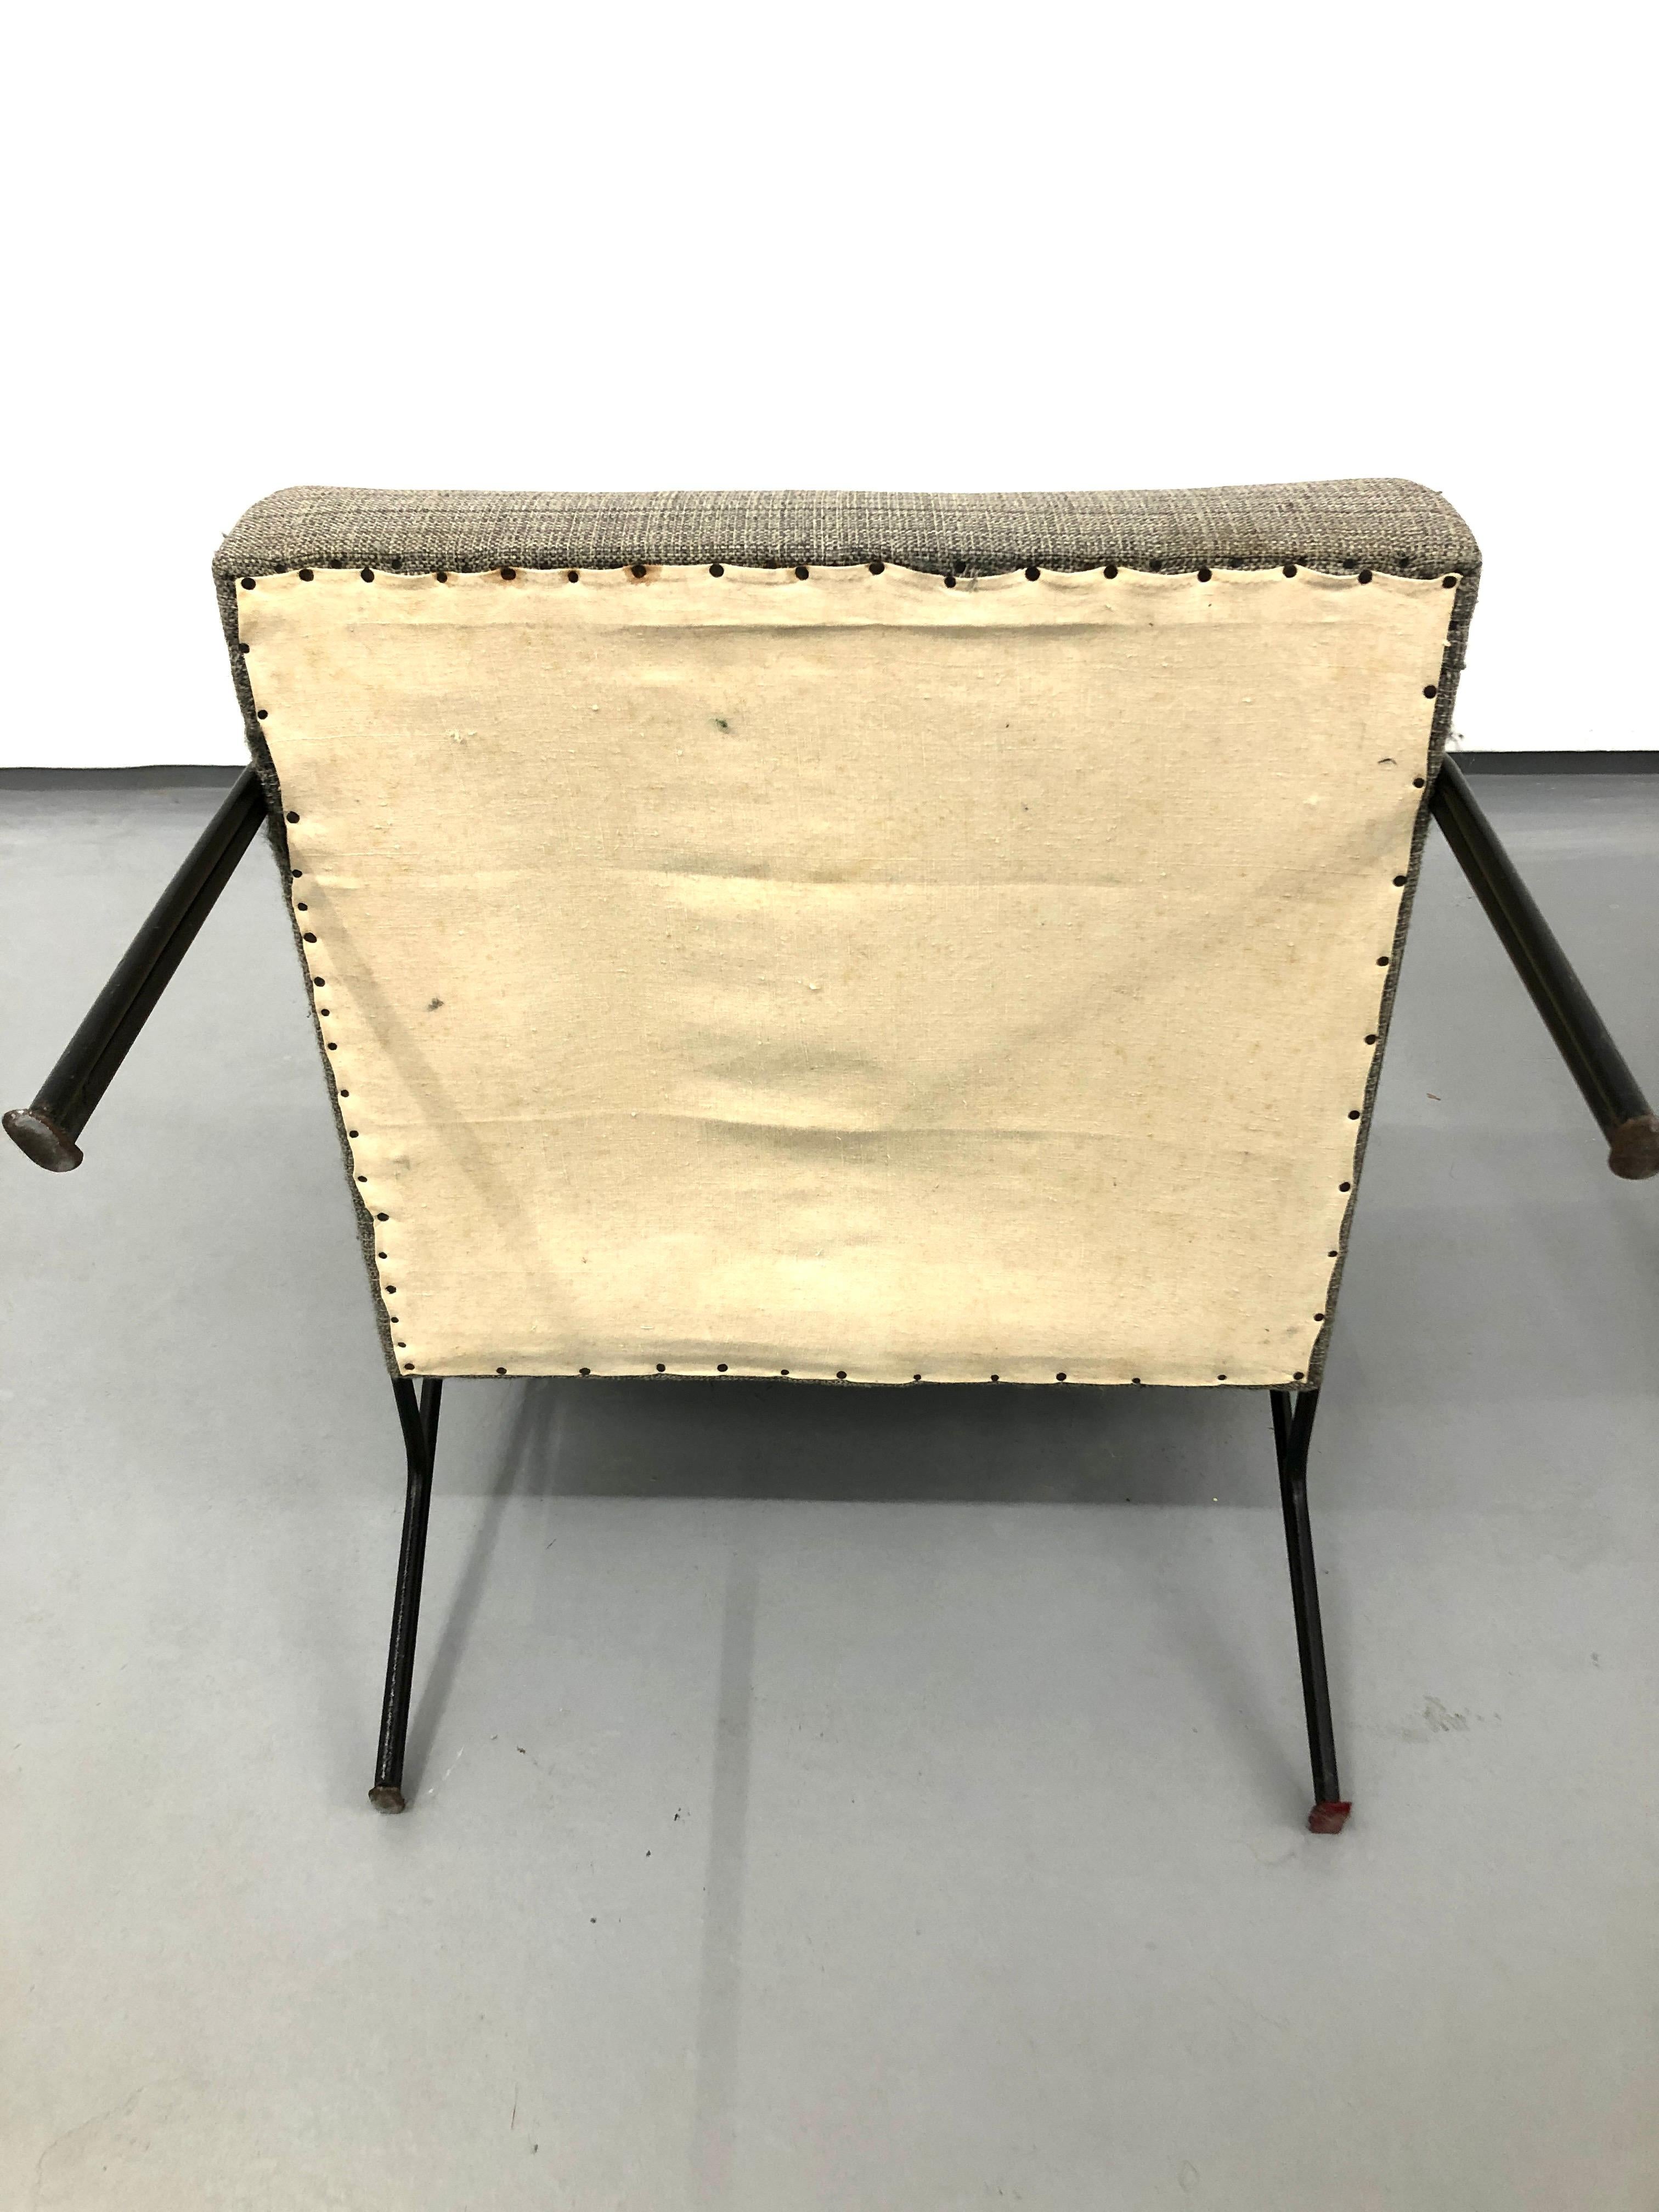  A.R.P. Armchair in Steel and Fabric by Pierre Guariche, Airborne, 1953 For Sale 2